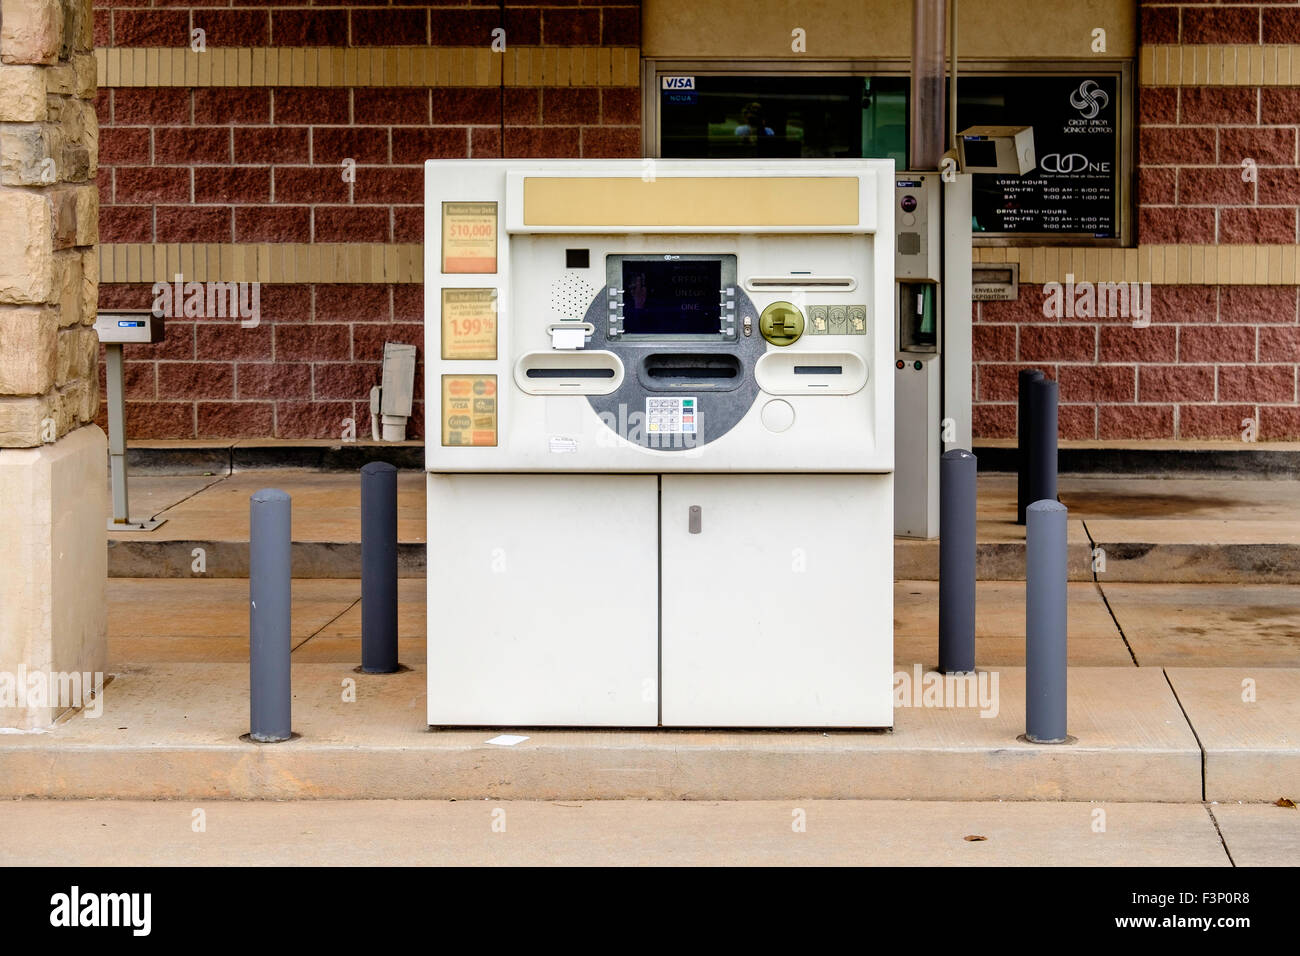 An ATM machine outside of a bank in Oklahoma City, Oklahoma, USA. Stock Photo